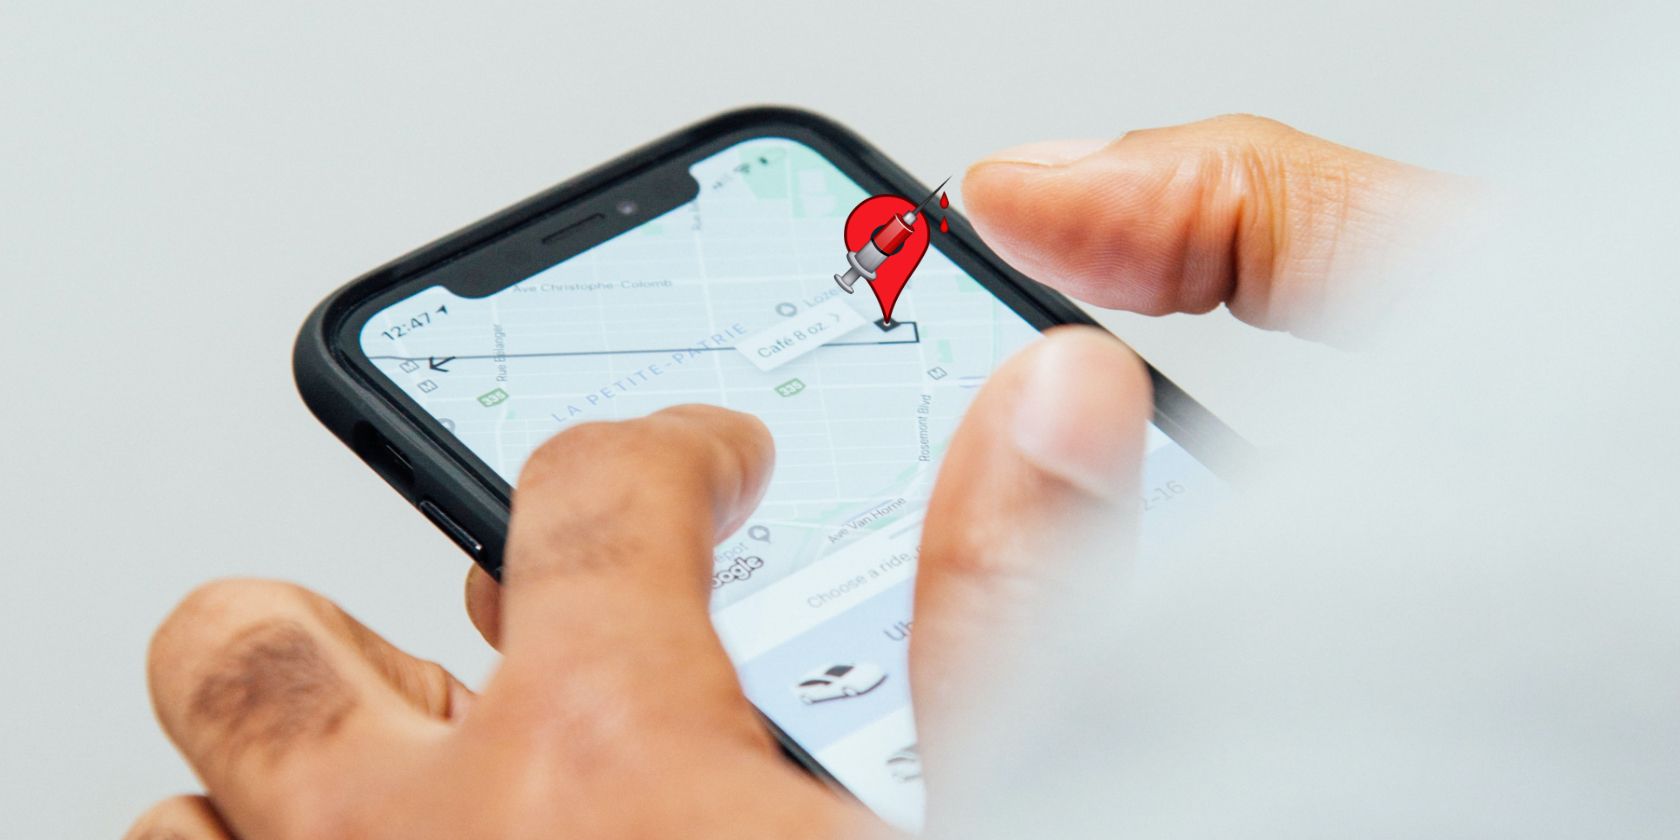 A close-up showing someone ordering an Uber ride on the app, with a vaccination site location balloon.